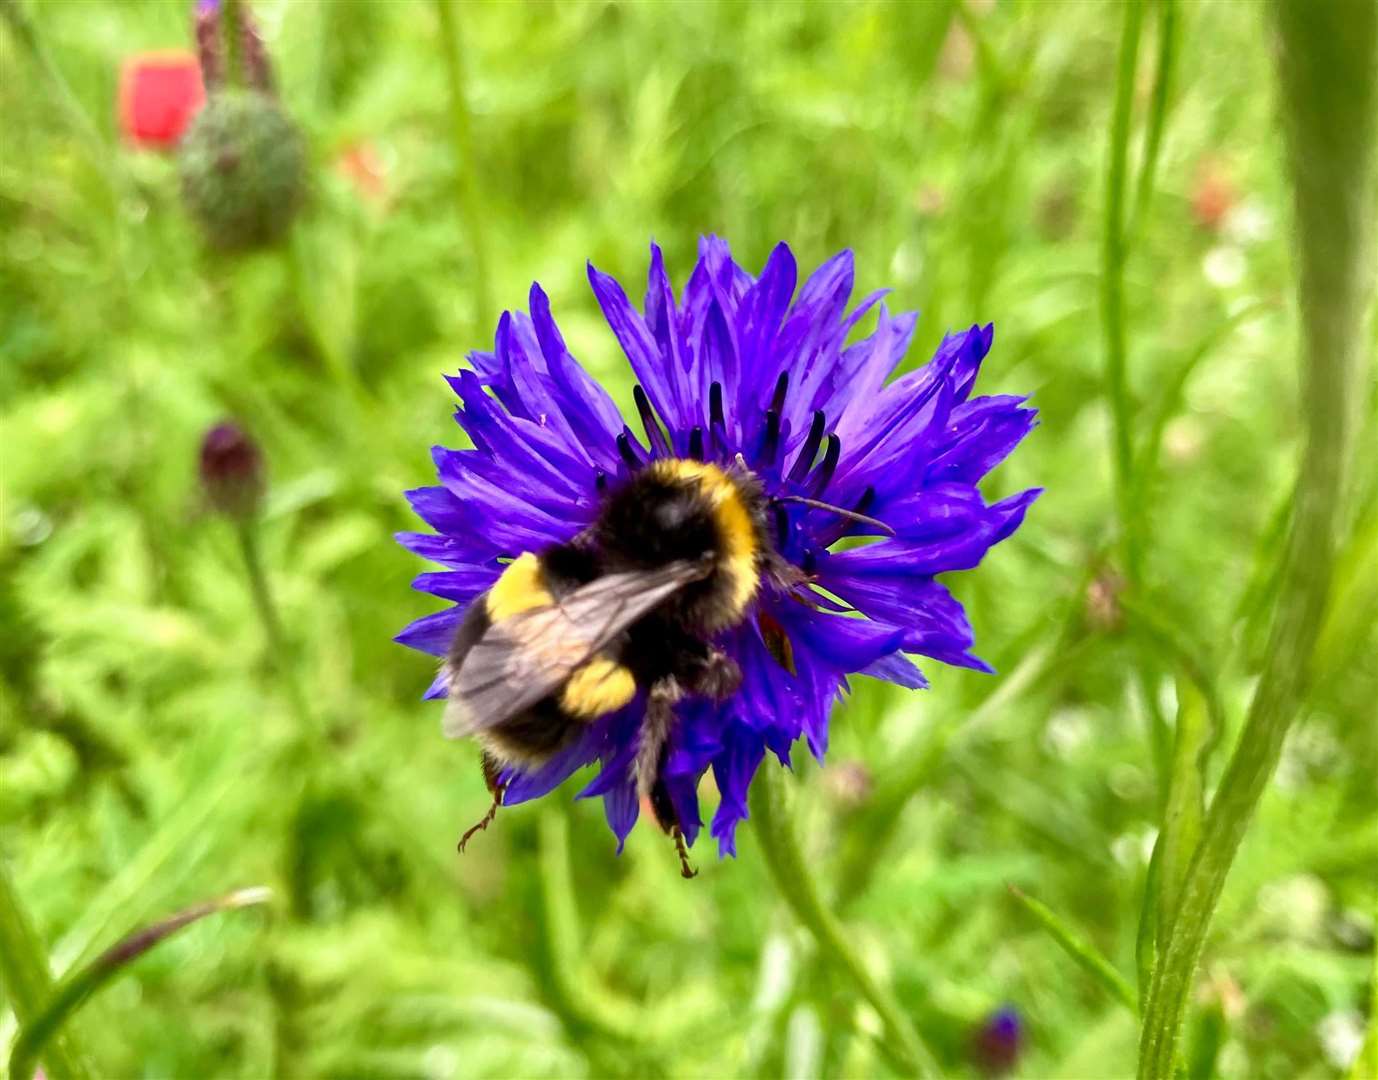 The RHS project aims to understand more about bumblebee habits. Image: Stock photo.